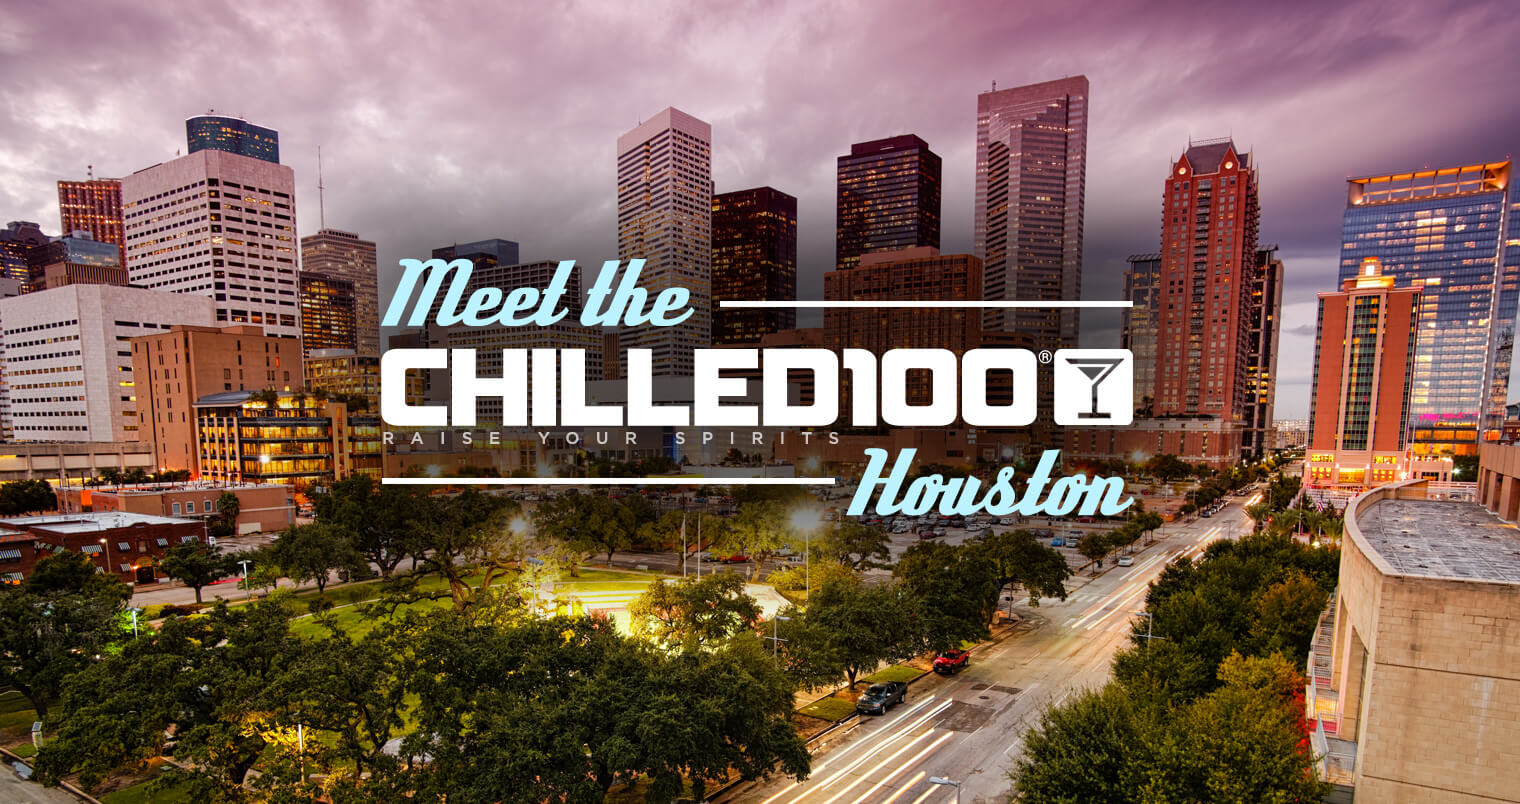 Meet the Chilled 100 Houston Members, industry news, what's chilling right now, featured image